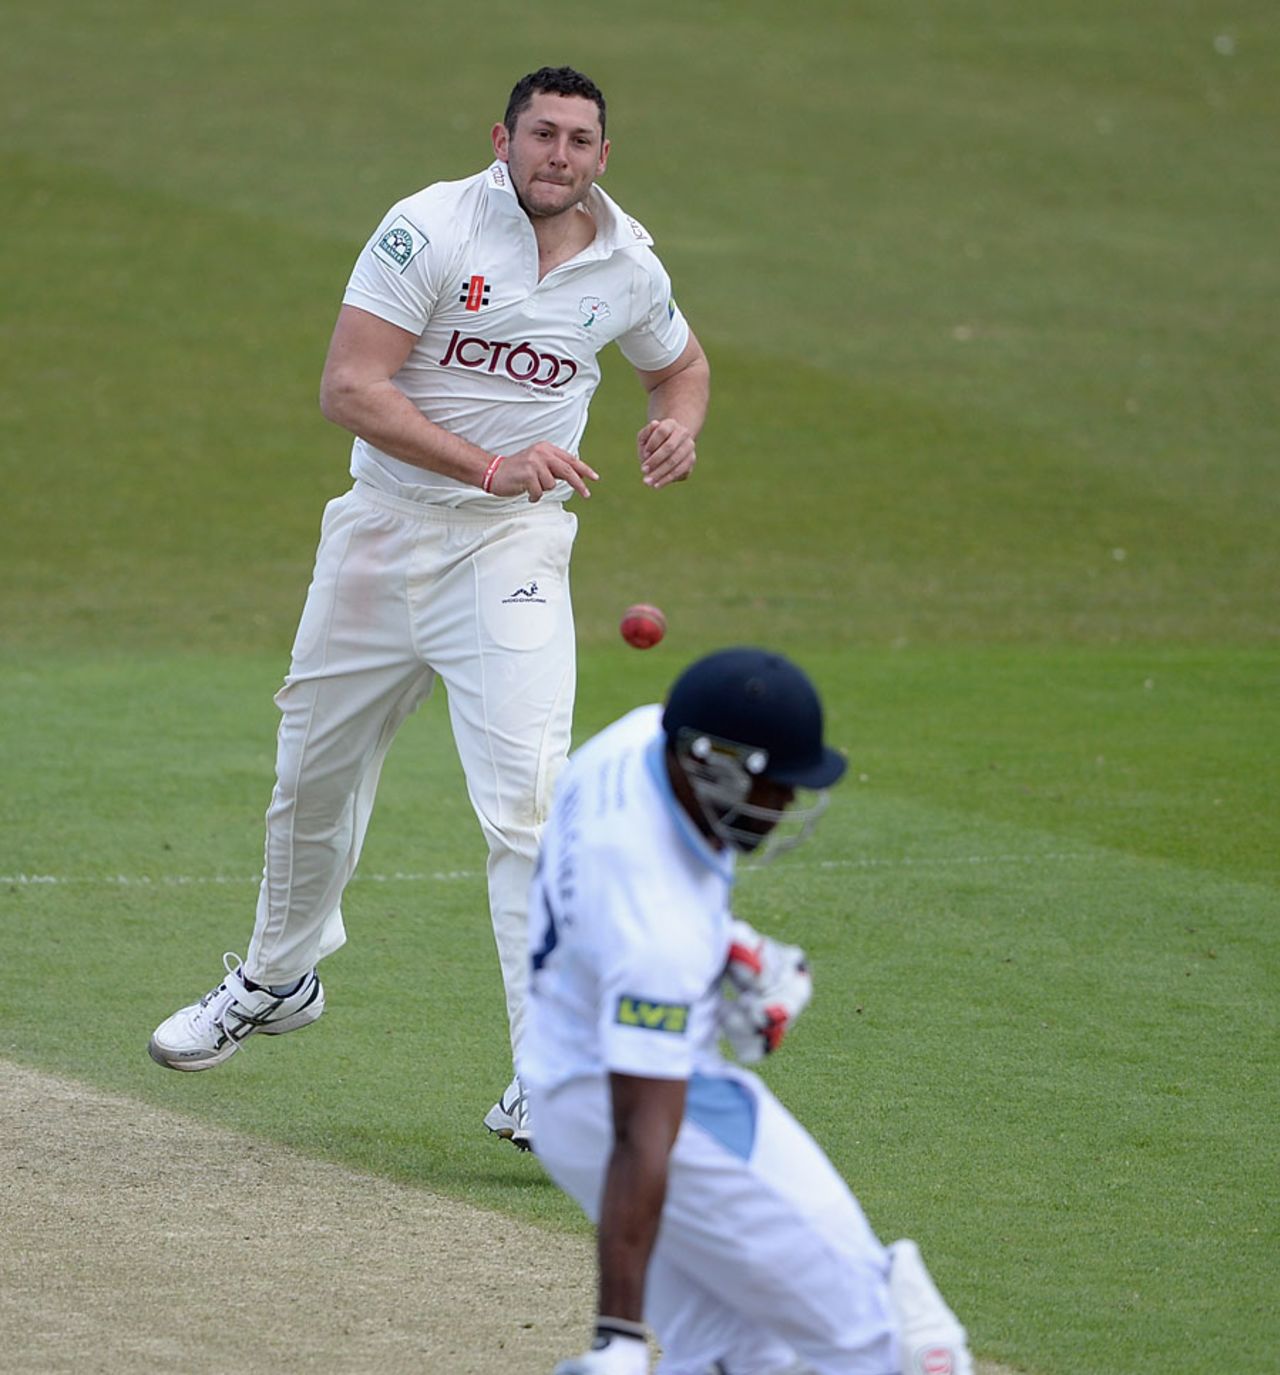 Tim Bresnan flings the ball back at Chesney Hughes, Yorkshire v Derbyshire, County Championship, Division One, Headingley, 2nd day, April 30, 2013